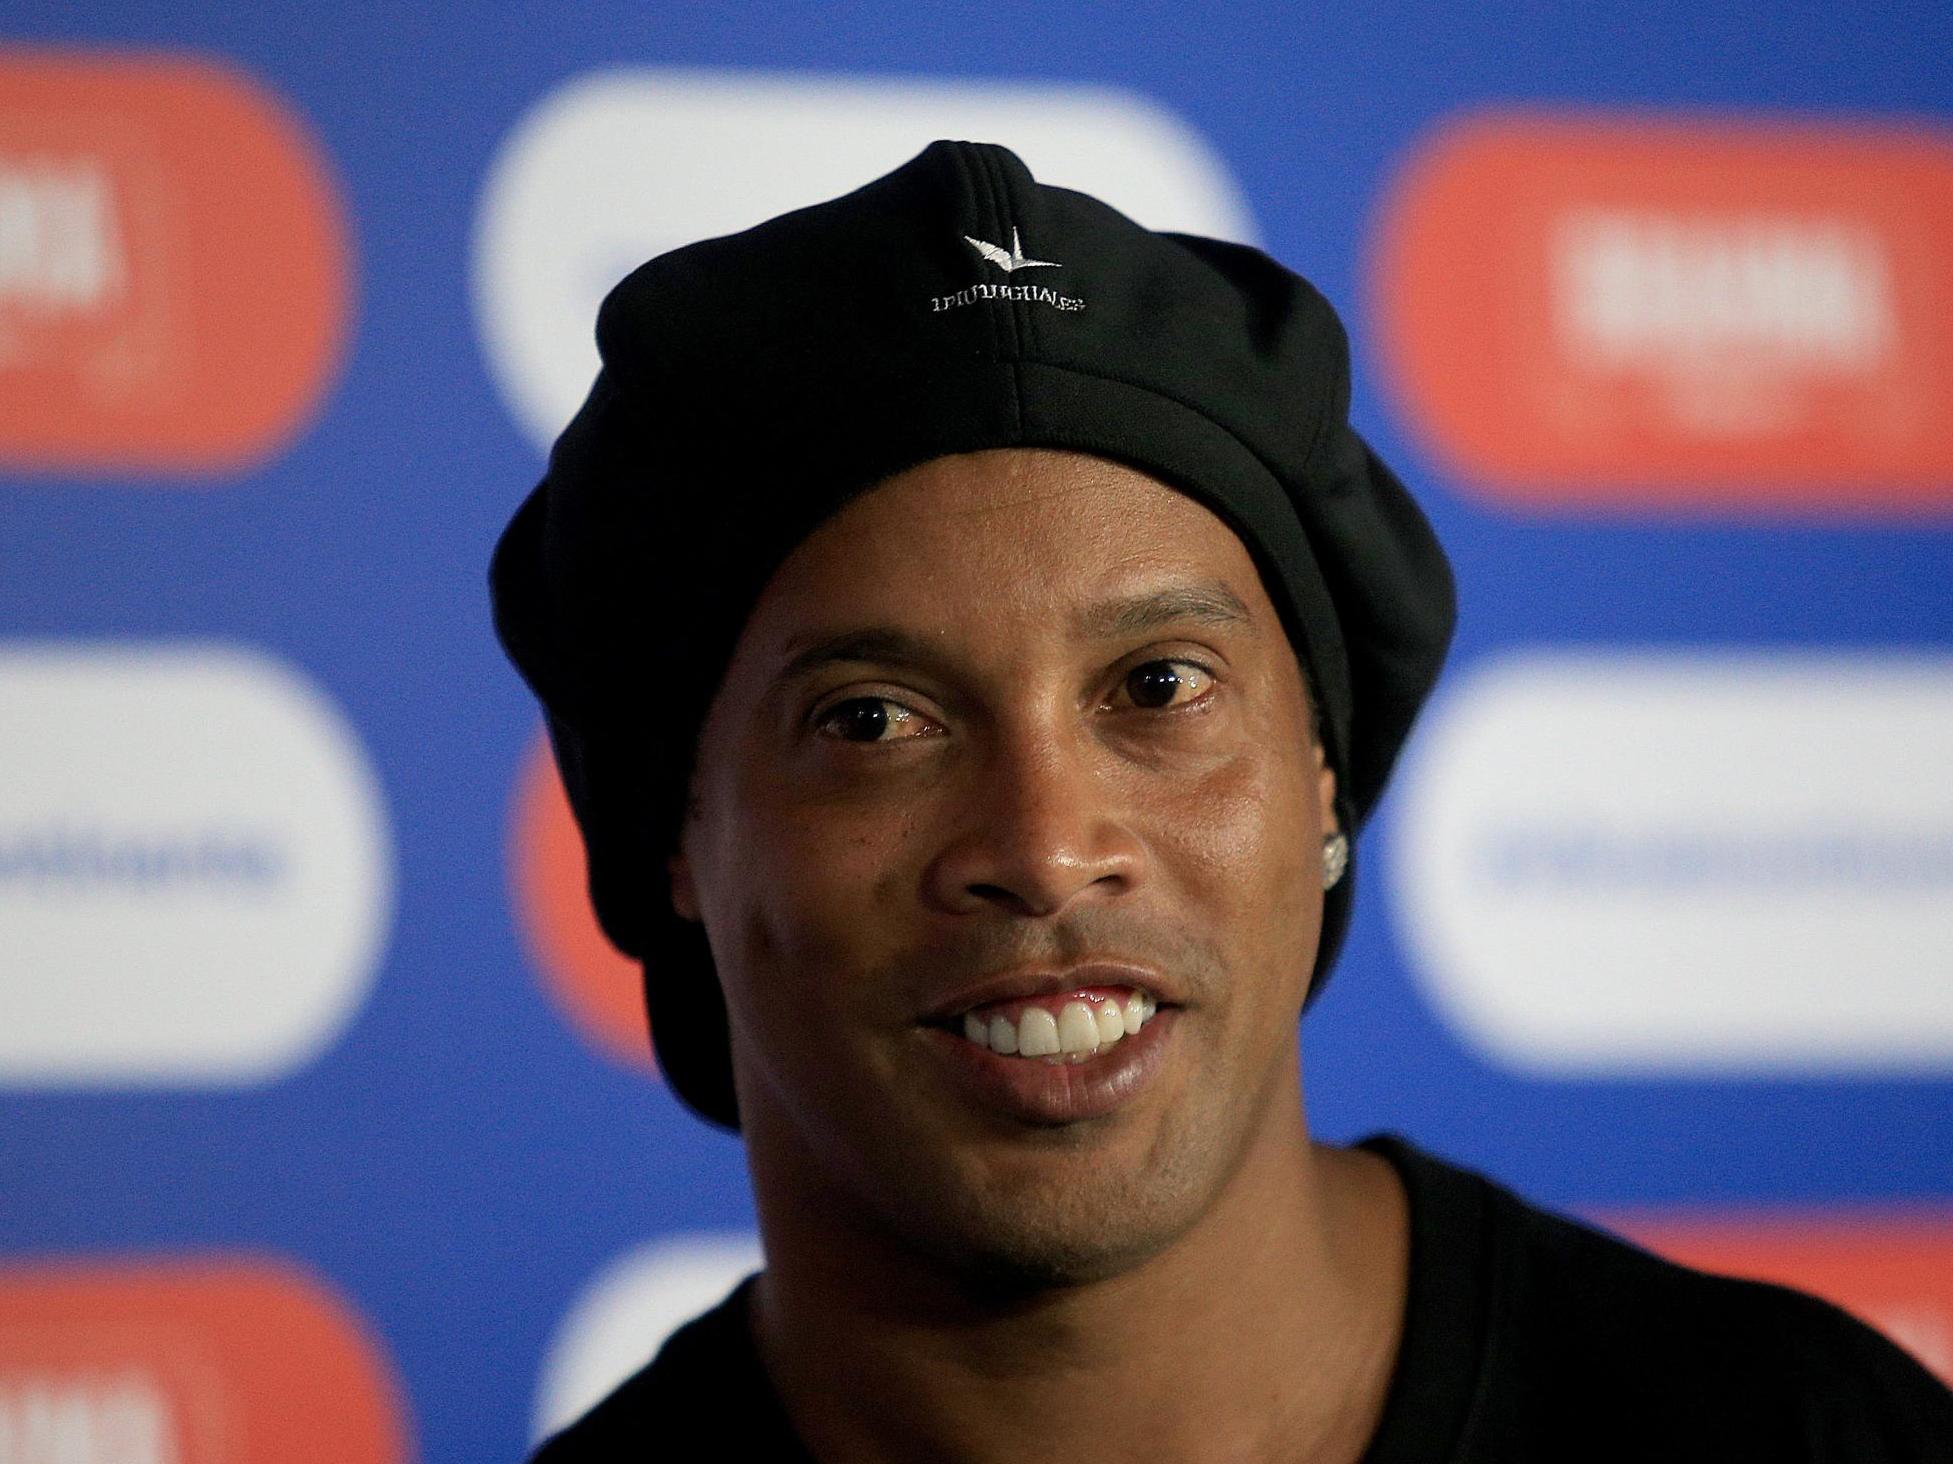 Ronaldinho will come out of retirement